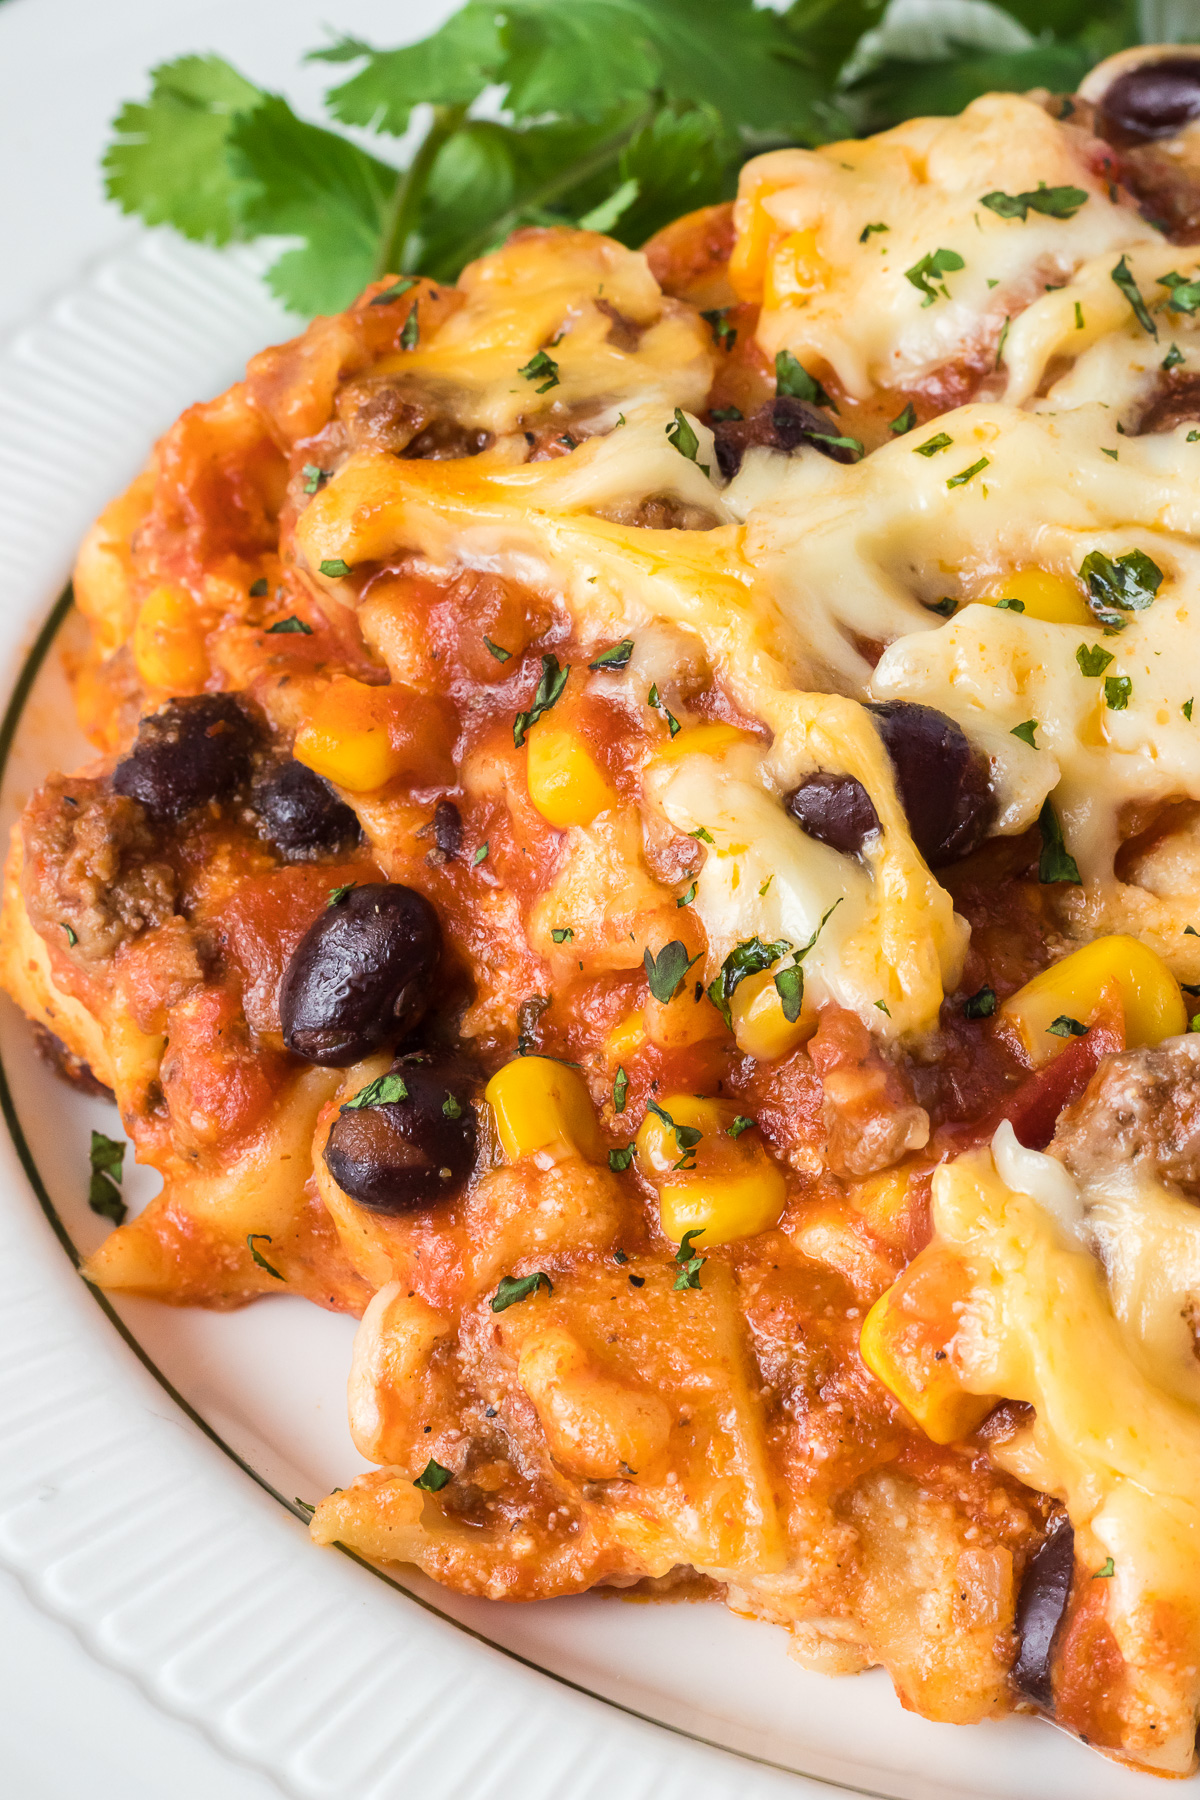 If you love Mexican food, this Slow Cooker Mexican Lasagna recipe might just make your taste buds sing! This twist on lasagna combines chorizo, enchilada red sauce, black beans, corn, and of course, a ton of cheese. Make this family-favorite comfort food in the slow cooker so you have a delicious meal full of fresh Mexican flavor that's ready with very little effort! via @foodhussy